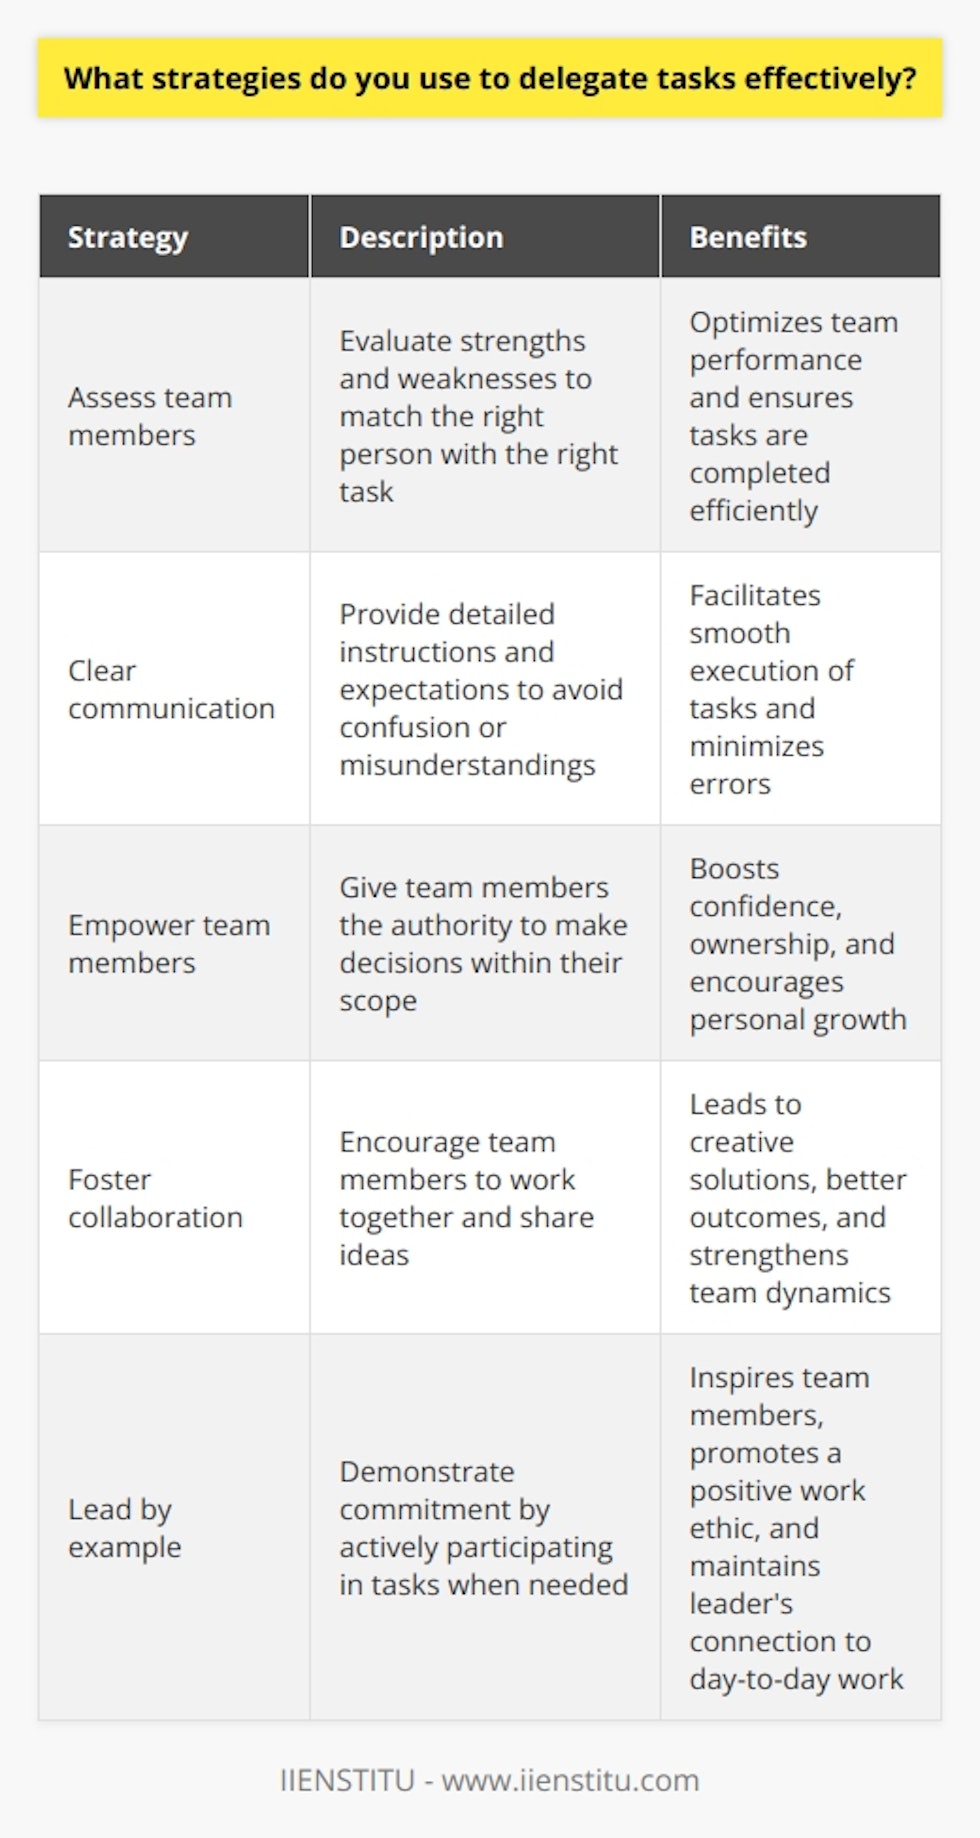 As a team leader, Ive developed several strategies for delegating tasks effectively. First, I assess each team members strengths and weaknesses. This allows me to match the right person with the right task. Clear communication is also crucial. I provide detailed instructions and expectations to avoid confusion or misunderstandings. Empowering Team Members I believe in empowering my team members. When delegating, I give them the authority to make decisions within their scope. This boosts their confidence and sense of ownership. Regular check-ins are important to monitor progress and offer support. However, I avoid micromanaging and trust my team to deliver results. Fostering Collaboration Collaboration is key to successful delegation. I encourage team members to work together and share ideas. This leads to more creative solutions and better outcomes. When challenges arise, we tackle them as a team. Everyones input is valued and considered. Leading by Example As a leader, I strive to lead by example. Im not afraid to roll up my sleeves and pitch in when needed. This shows my team that Im committed to our shared goals. It also helps me stay connected to the day-to-day work. Celebrating Successes Finally, I believe in celebrating successes along the way. When a team member excels at a delegated task, I acknowledge their hard work. Public recognition boosts morale and motivation. It also reinforces the importance of effective delegation in achieving our objectives.